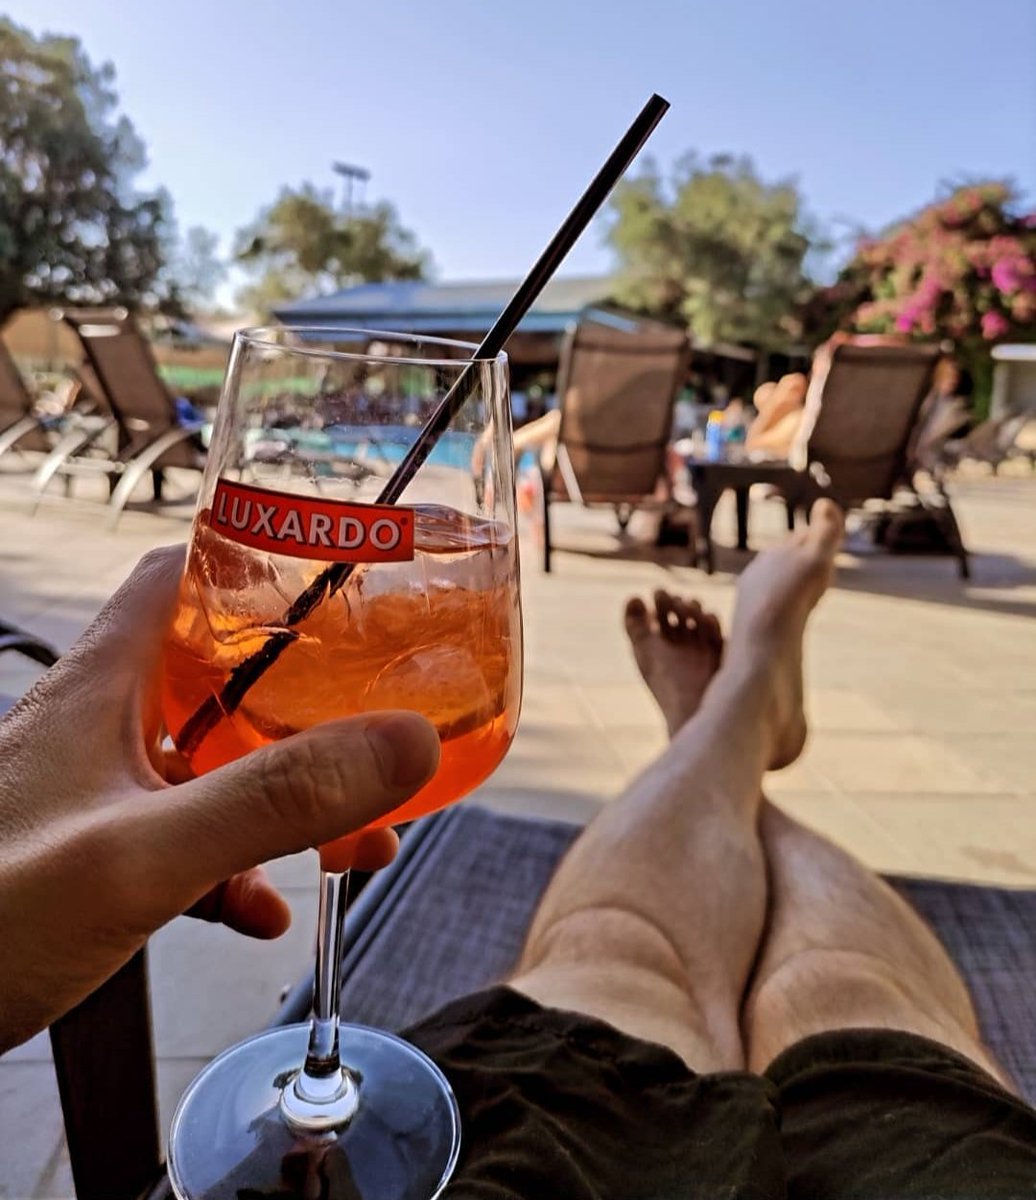 Day off 💦☀️🎶🍸
Have a nice week everyone!🎸🔥
#GoodMorningTwitterWorld
#Dayoff #MondayMood #MondayVibes #cocktail #pooltime #pool #sunvibes #weekvibes